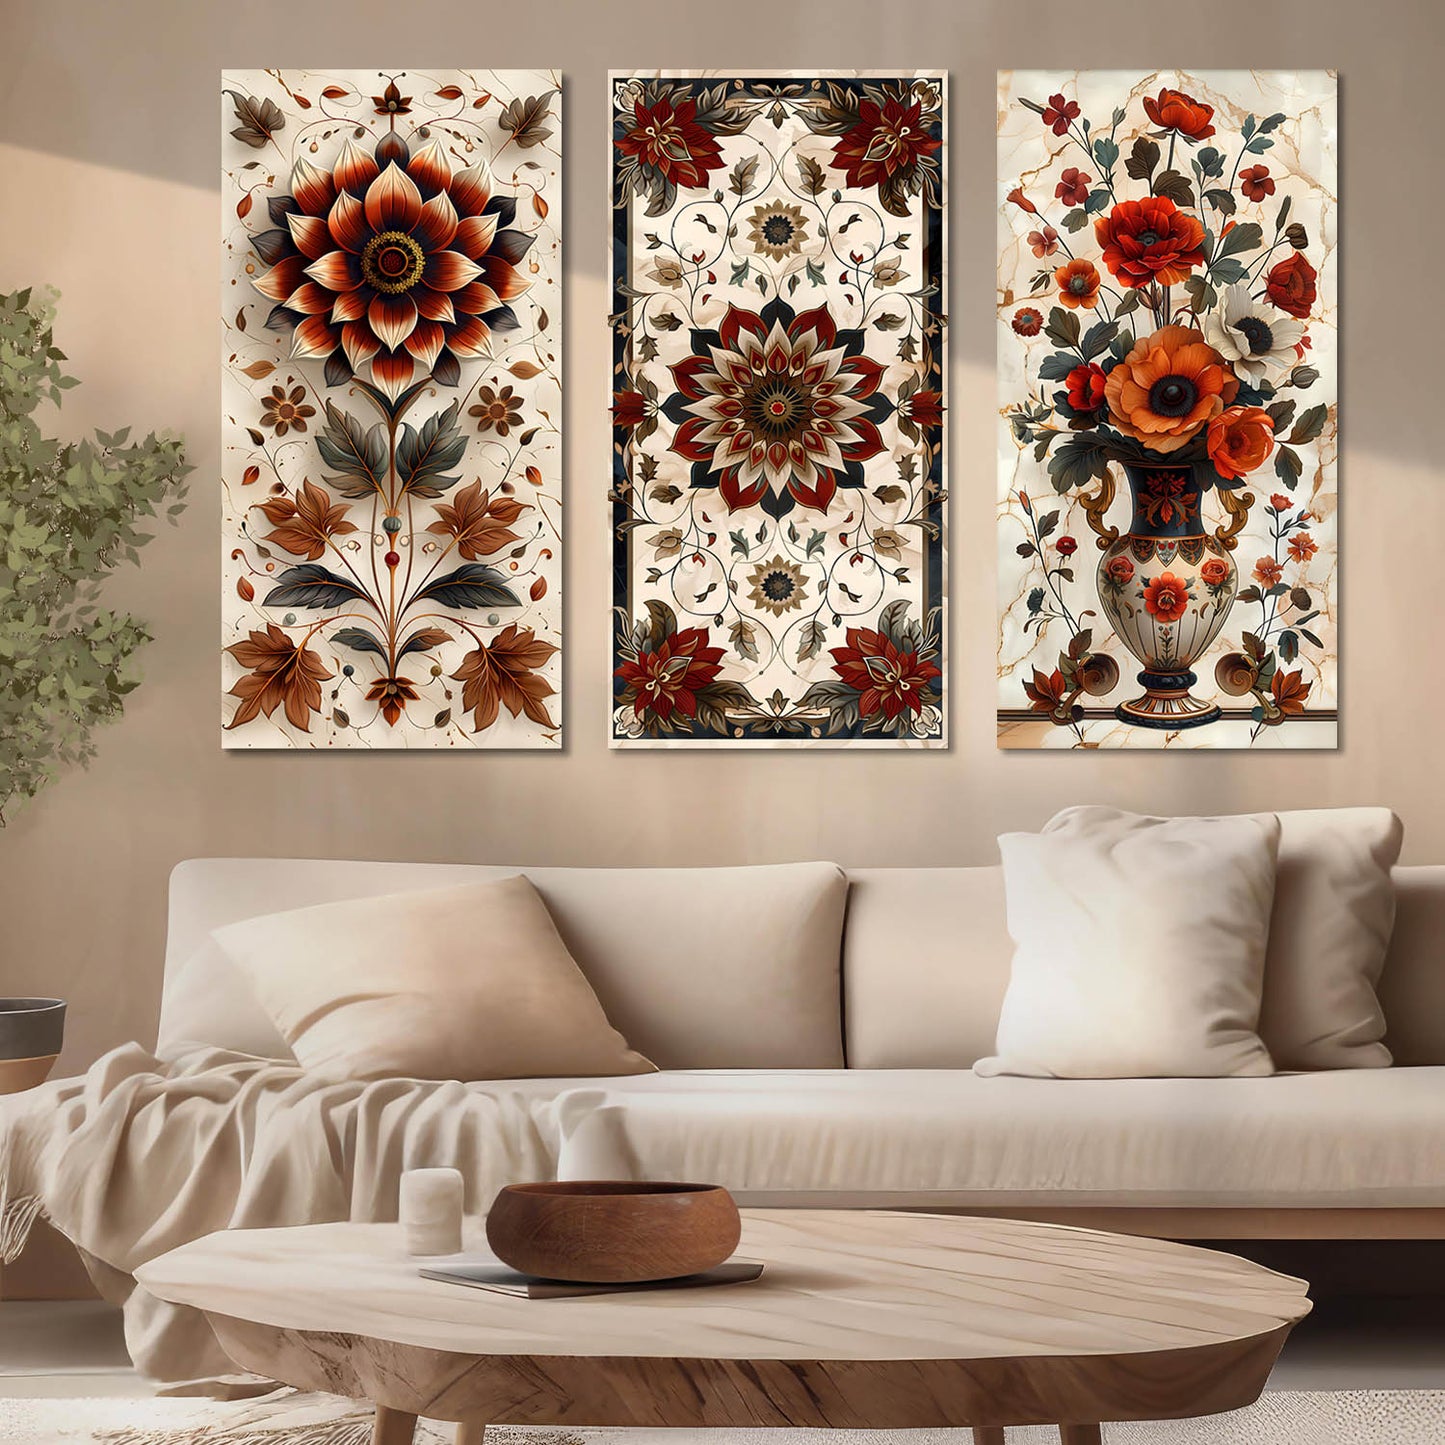 Floral Modern Wall Art Canvas, Wall Print for Living Room Wall Decoration